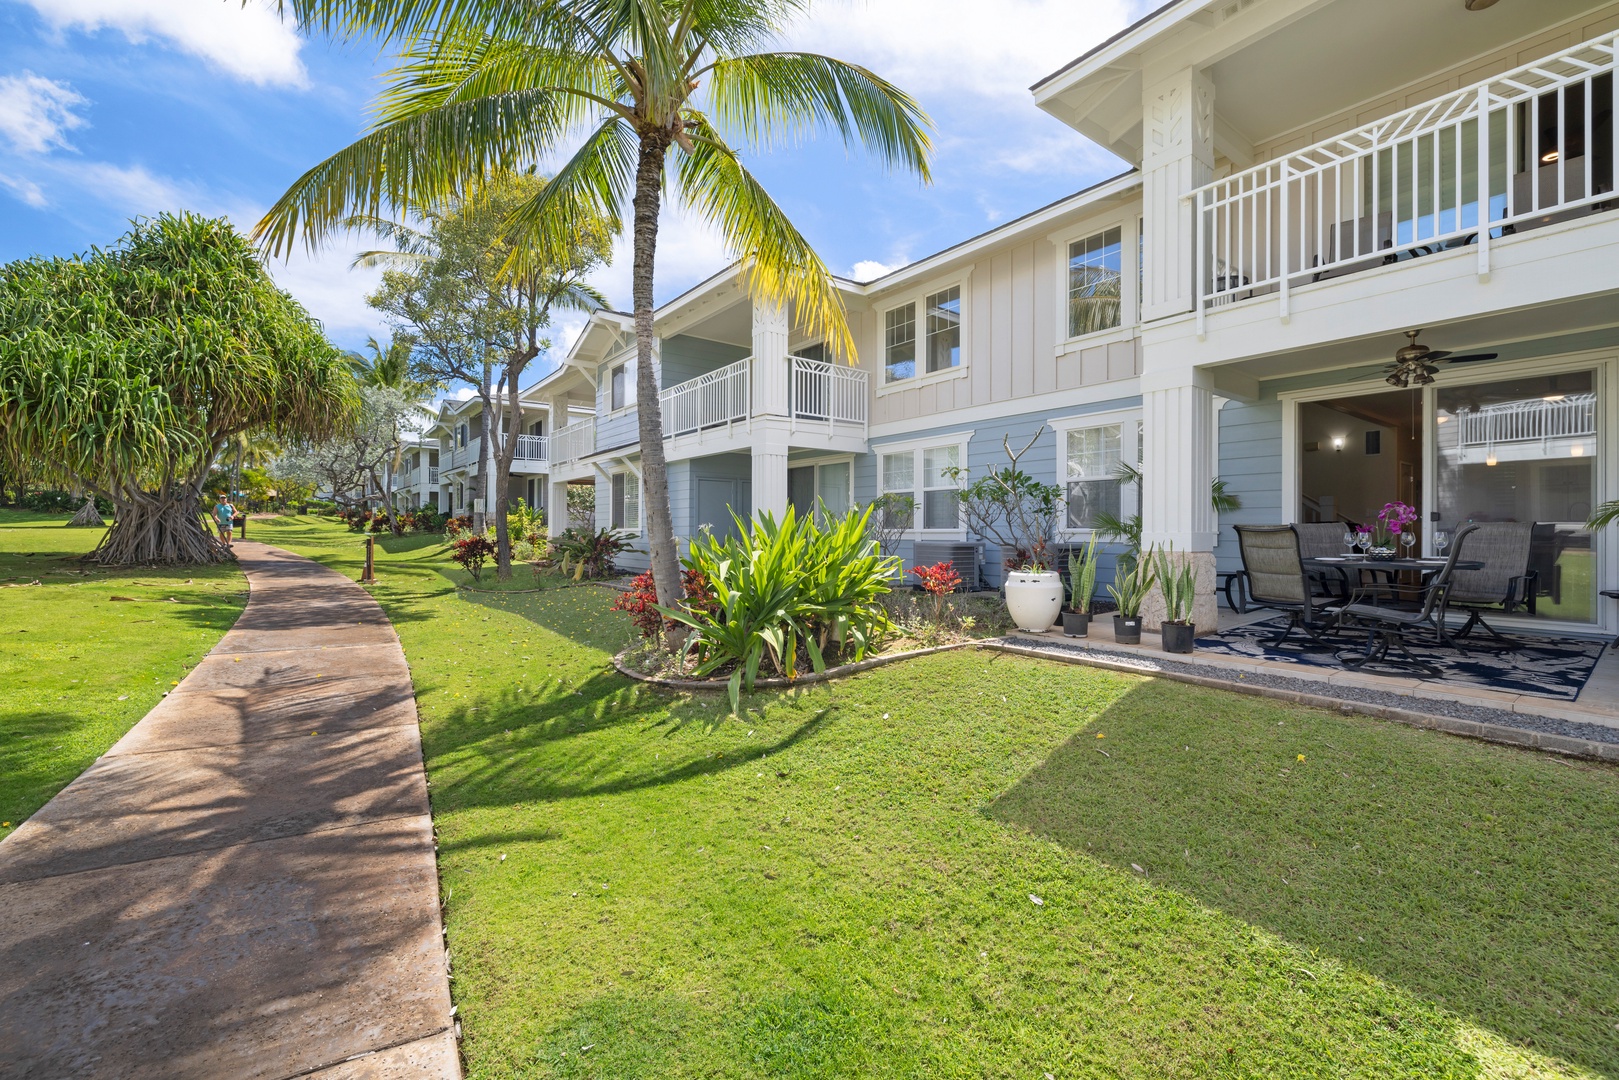 Kapolei Vacation Rentals, Ko Olina Kai 1083C - An outside view of the lanai and the manicured lawn.